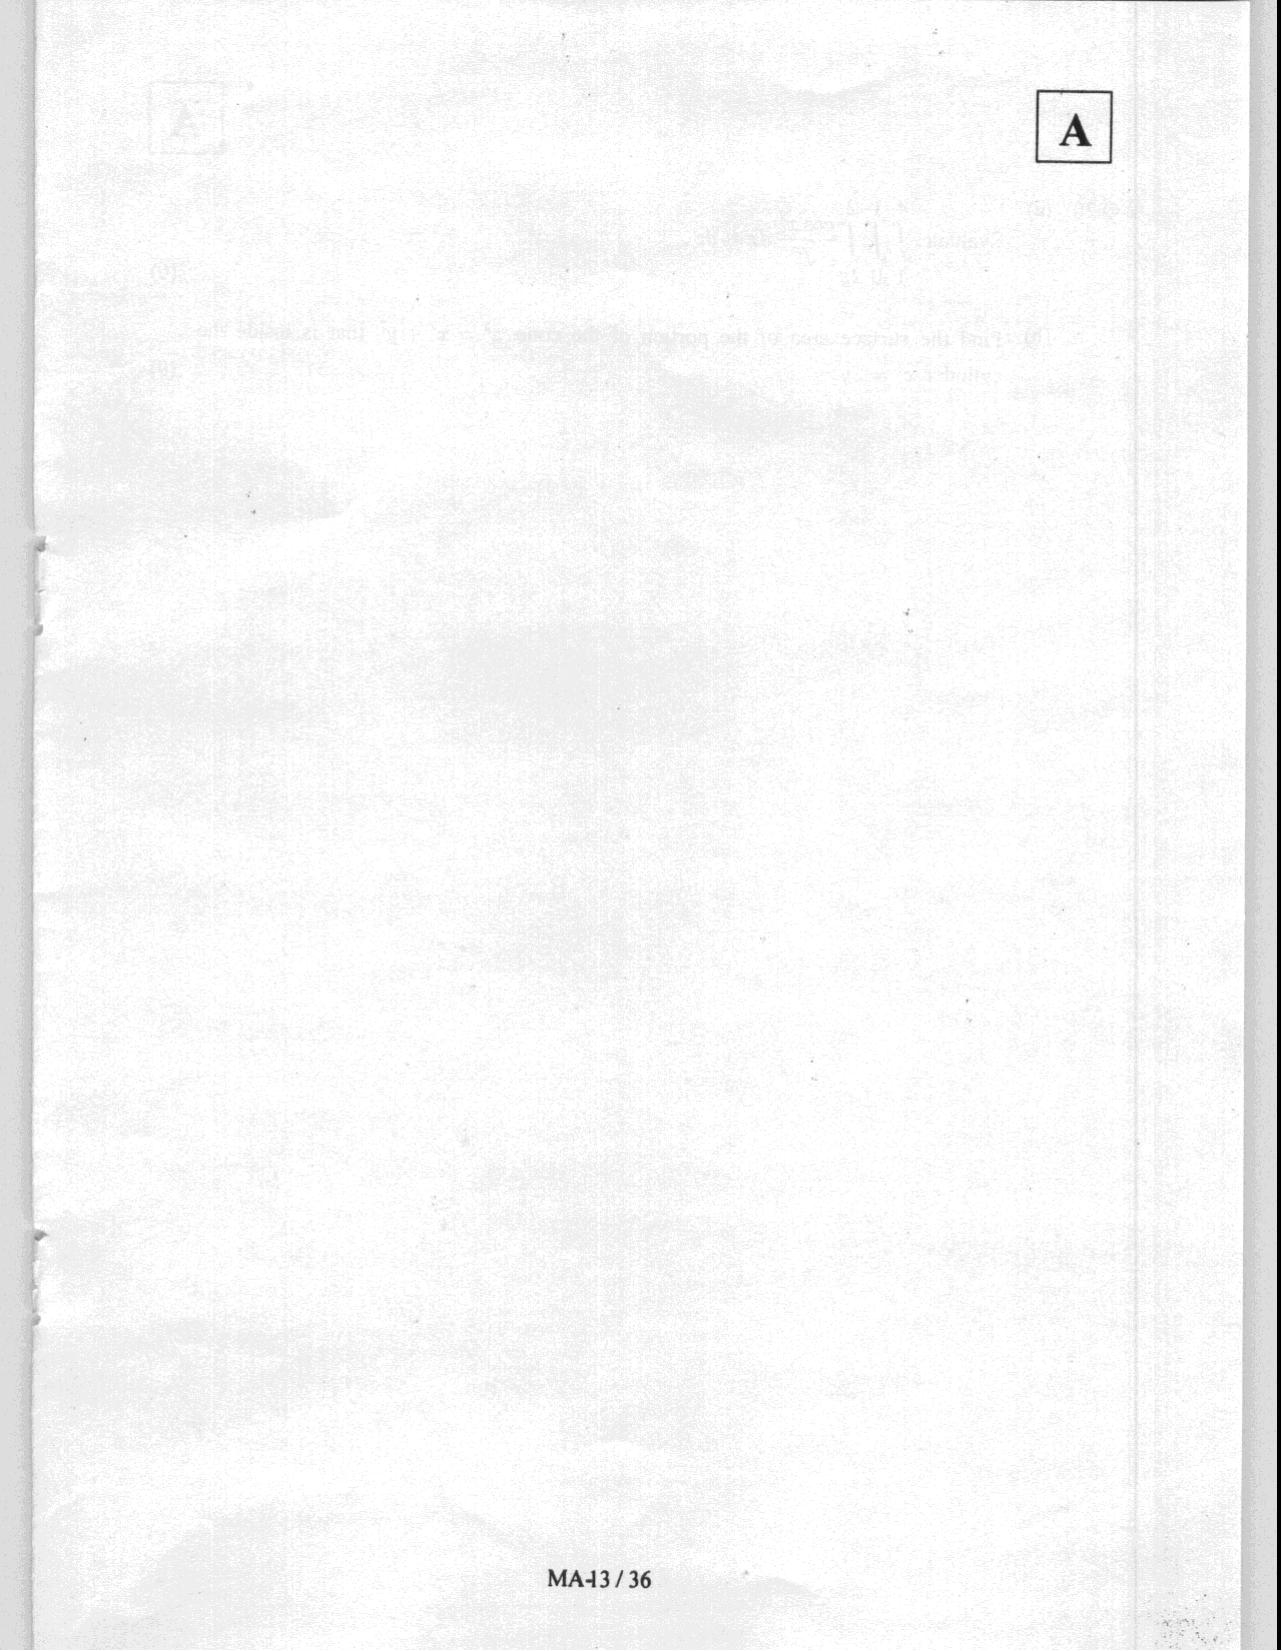 JAM 2008: MA Question Paper - Page 15